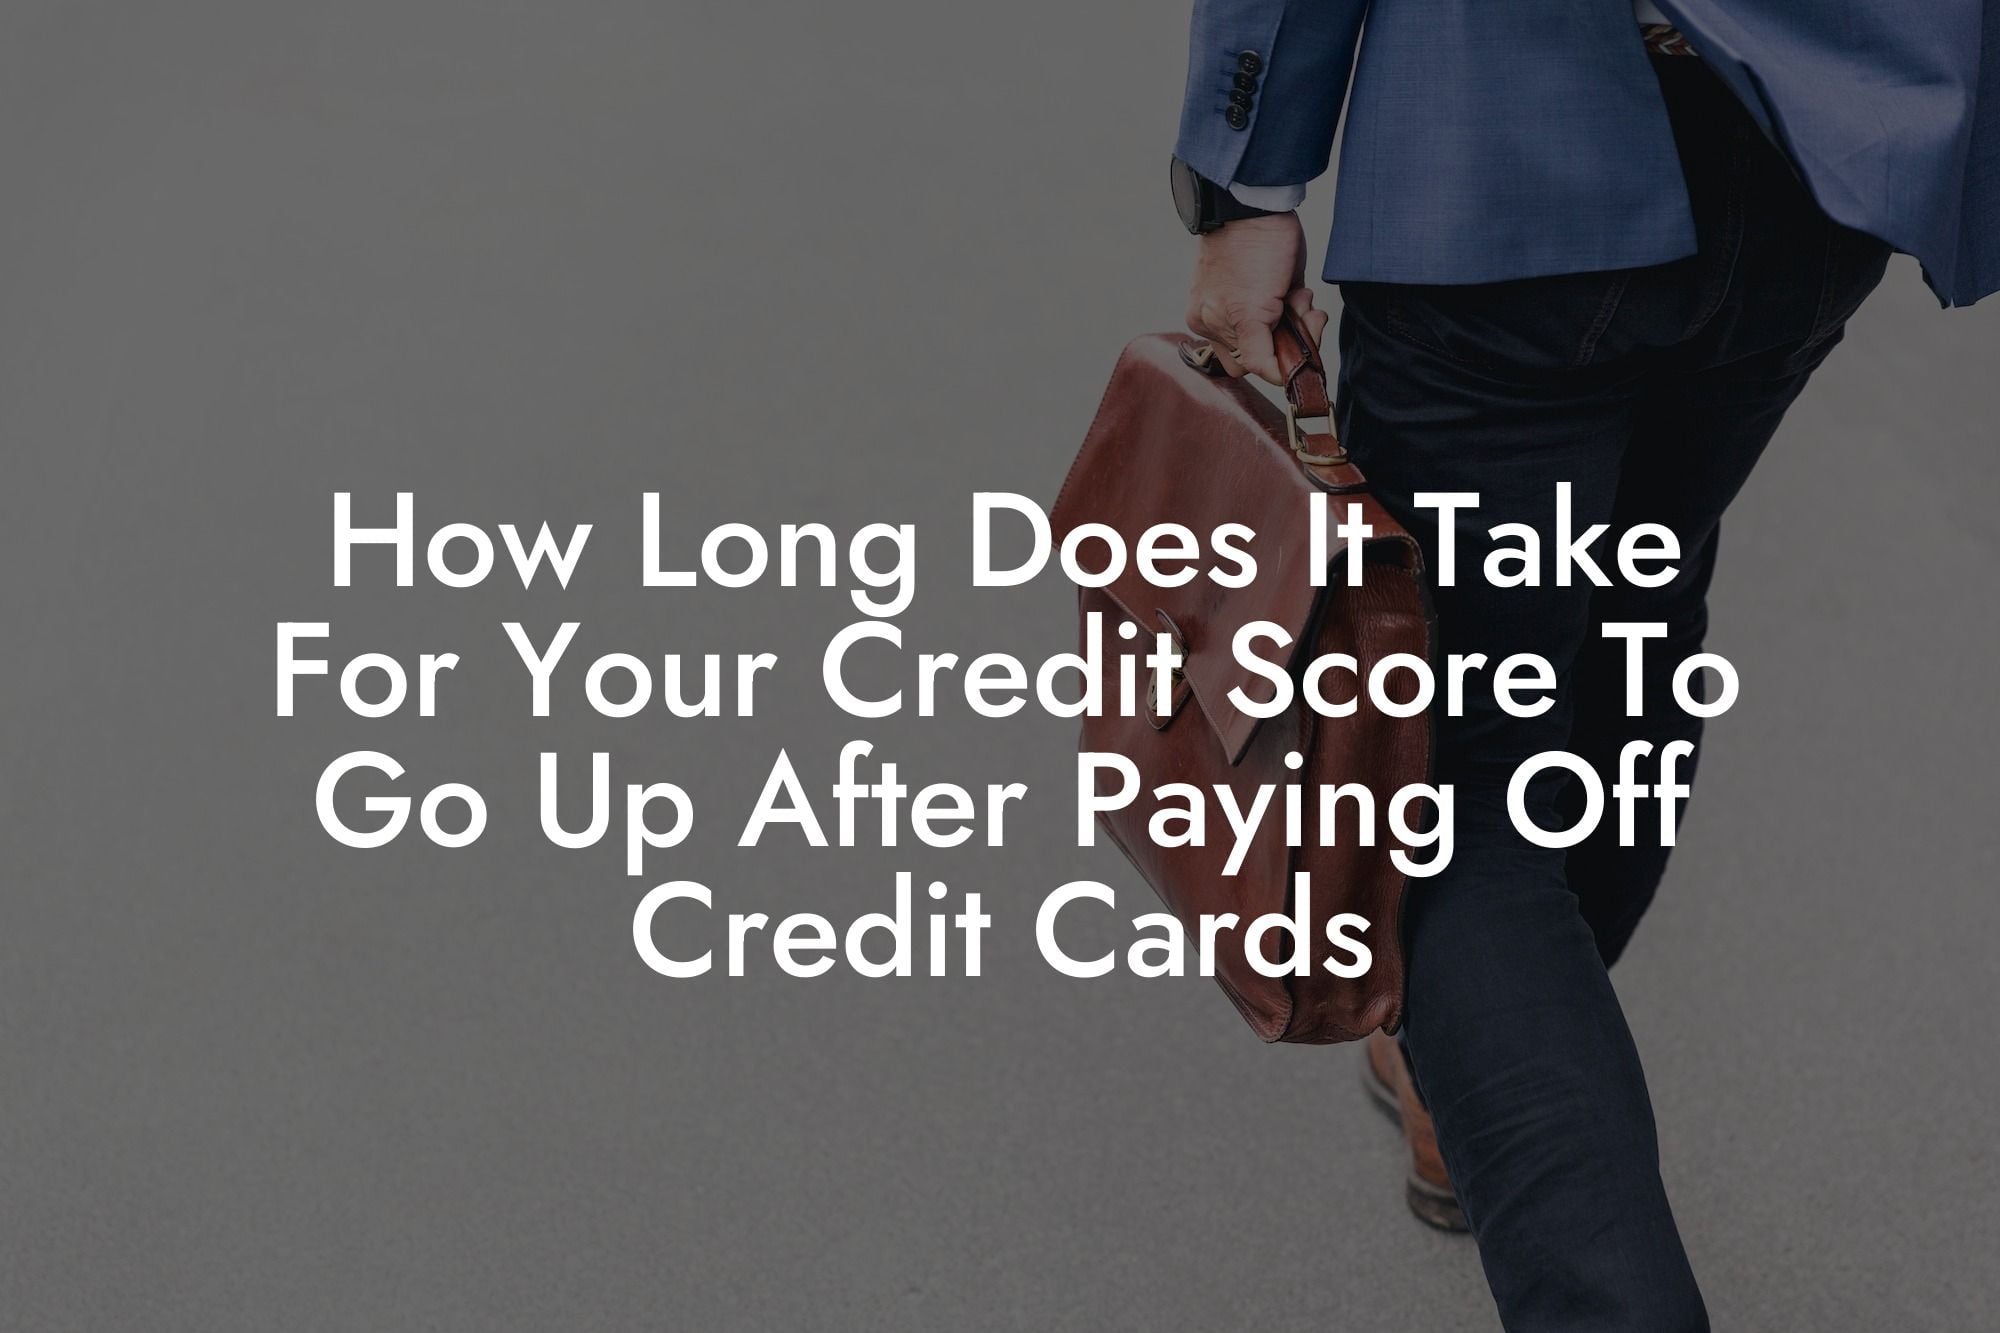 How Long Does It Take For Your Credit Score To Go Up After Paying Off Credit Cards